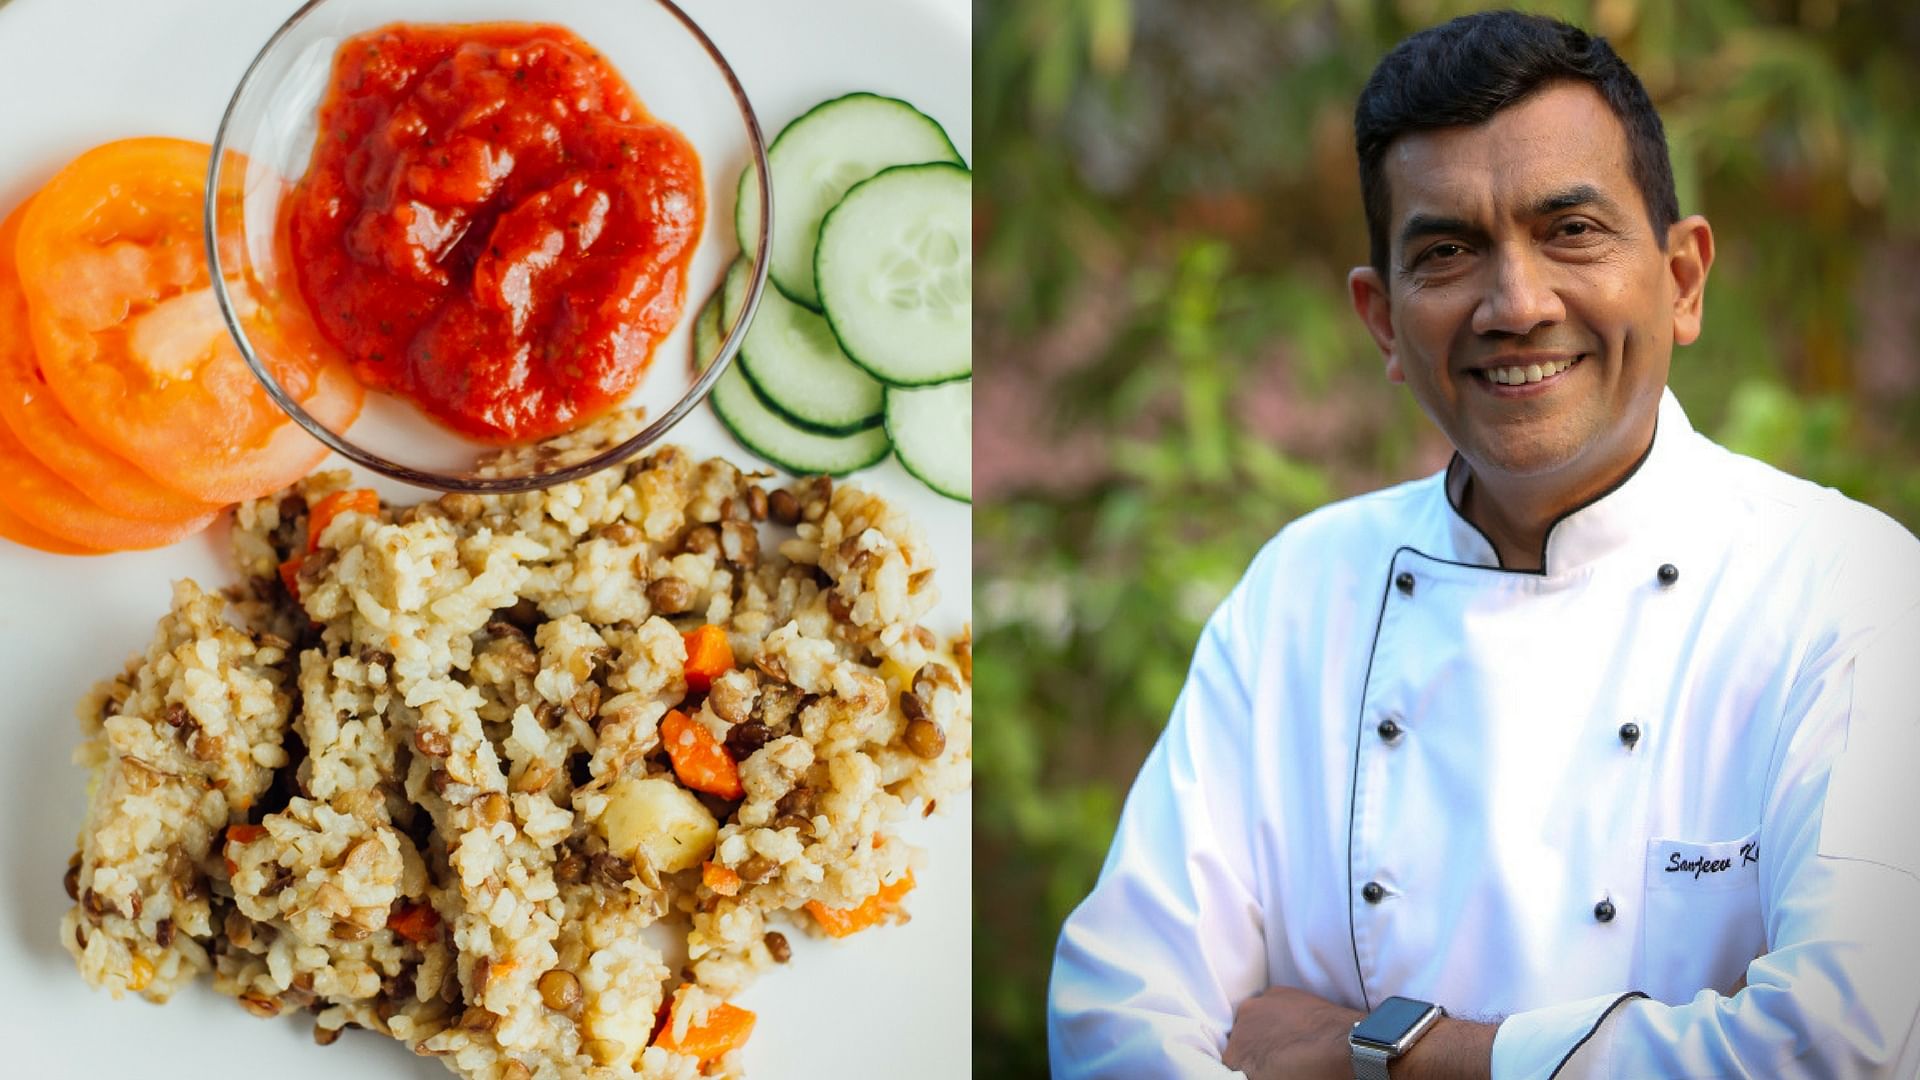 We caught up with Chef Sanjeev Kapoor on  what makes khichdi a wholesome household favourite.